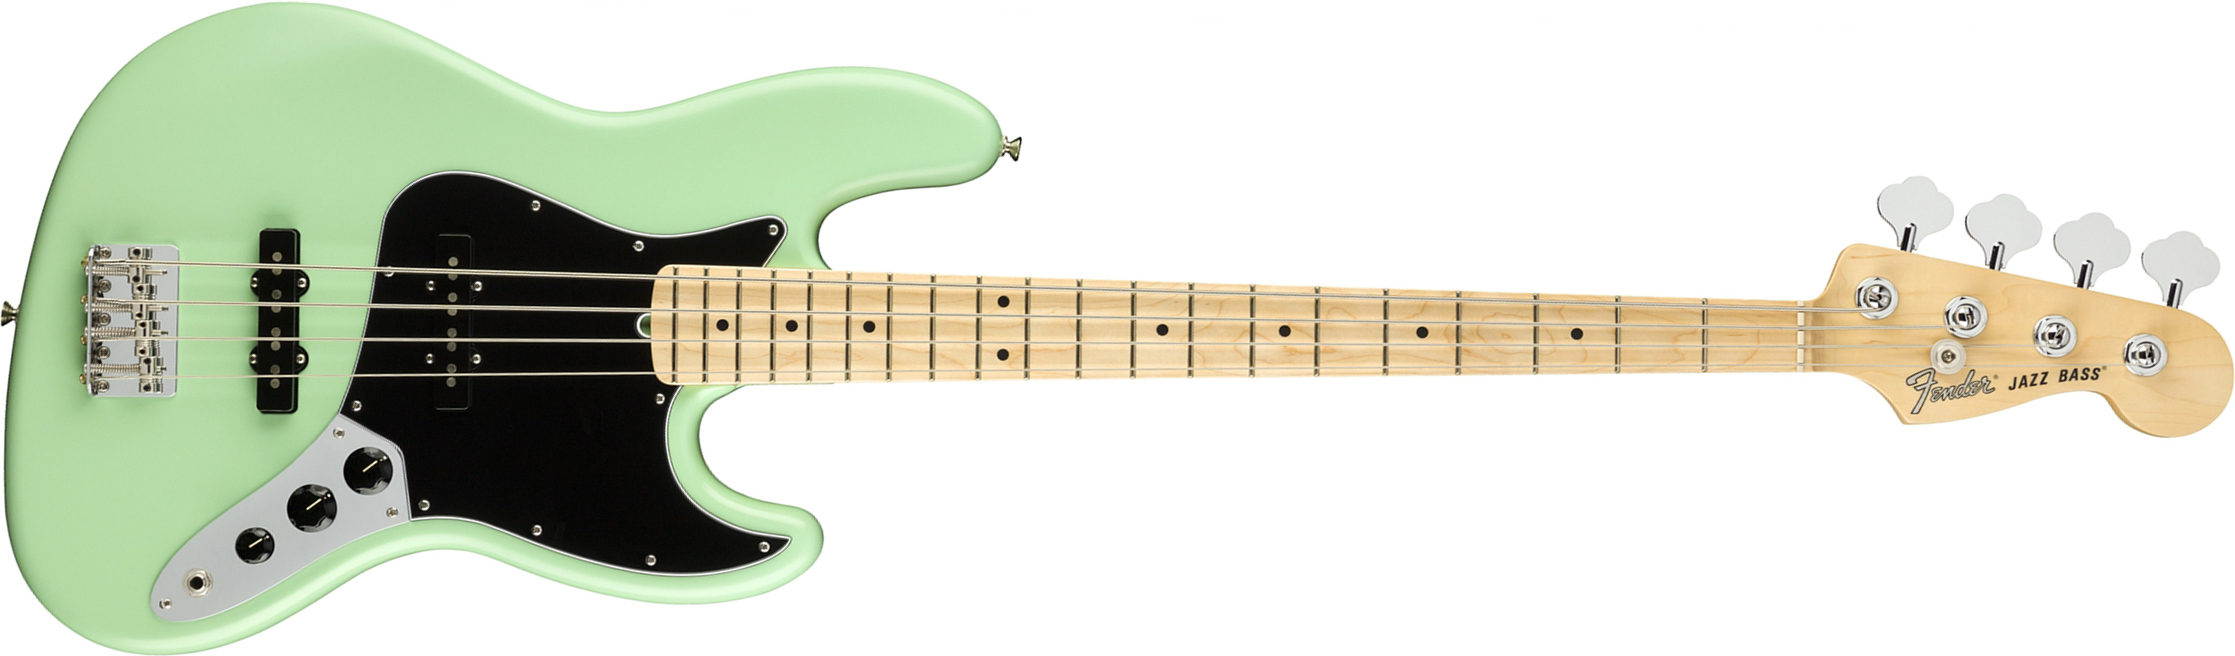 Fender Jazz Bass American Performer Usa Mn - Satin Surf Green - Basse Électrique Solid Body - Main picture